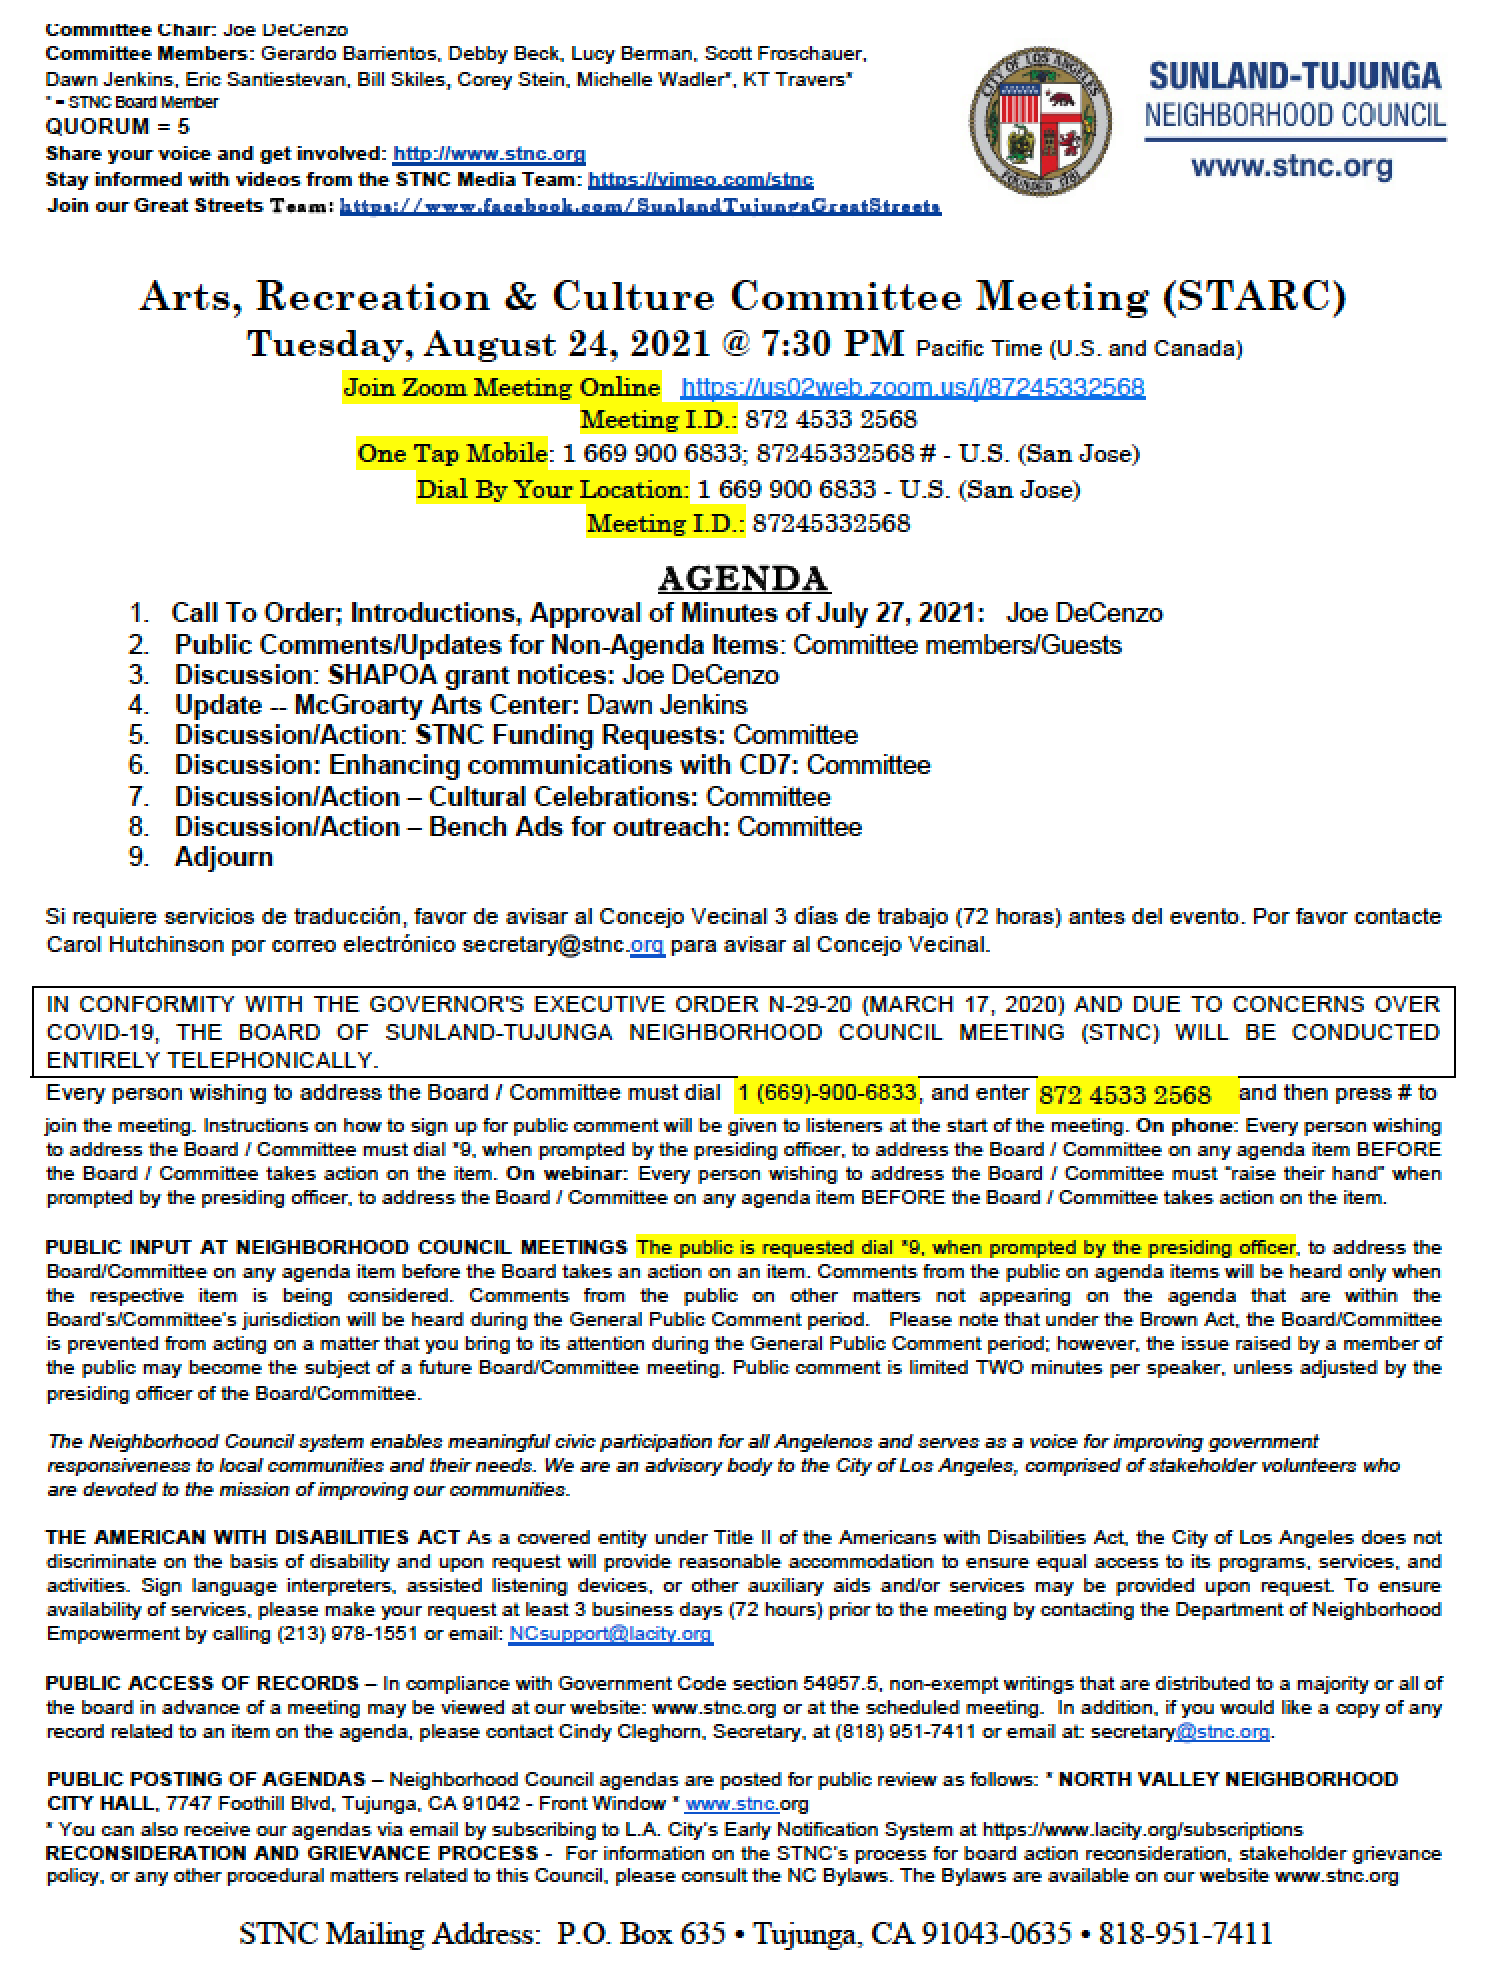 Recreation & Culture Committee Meeting (STARC) 